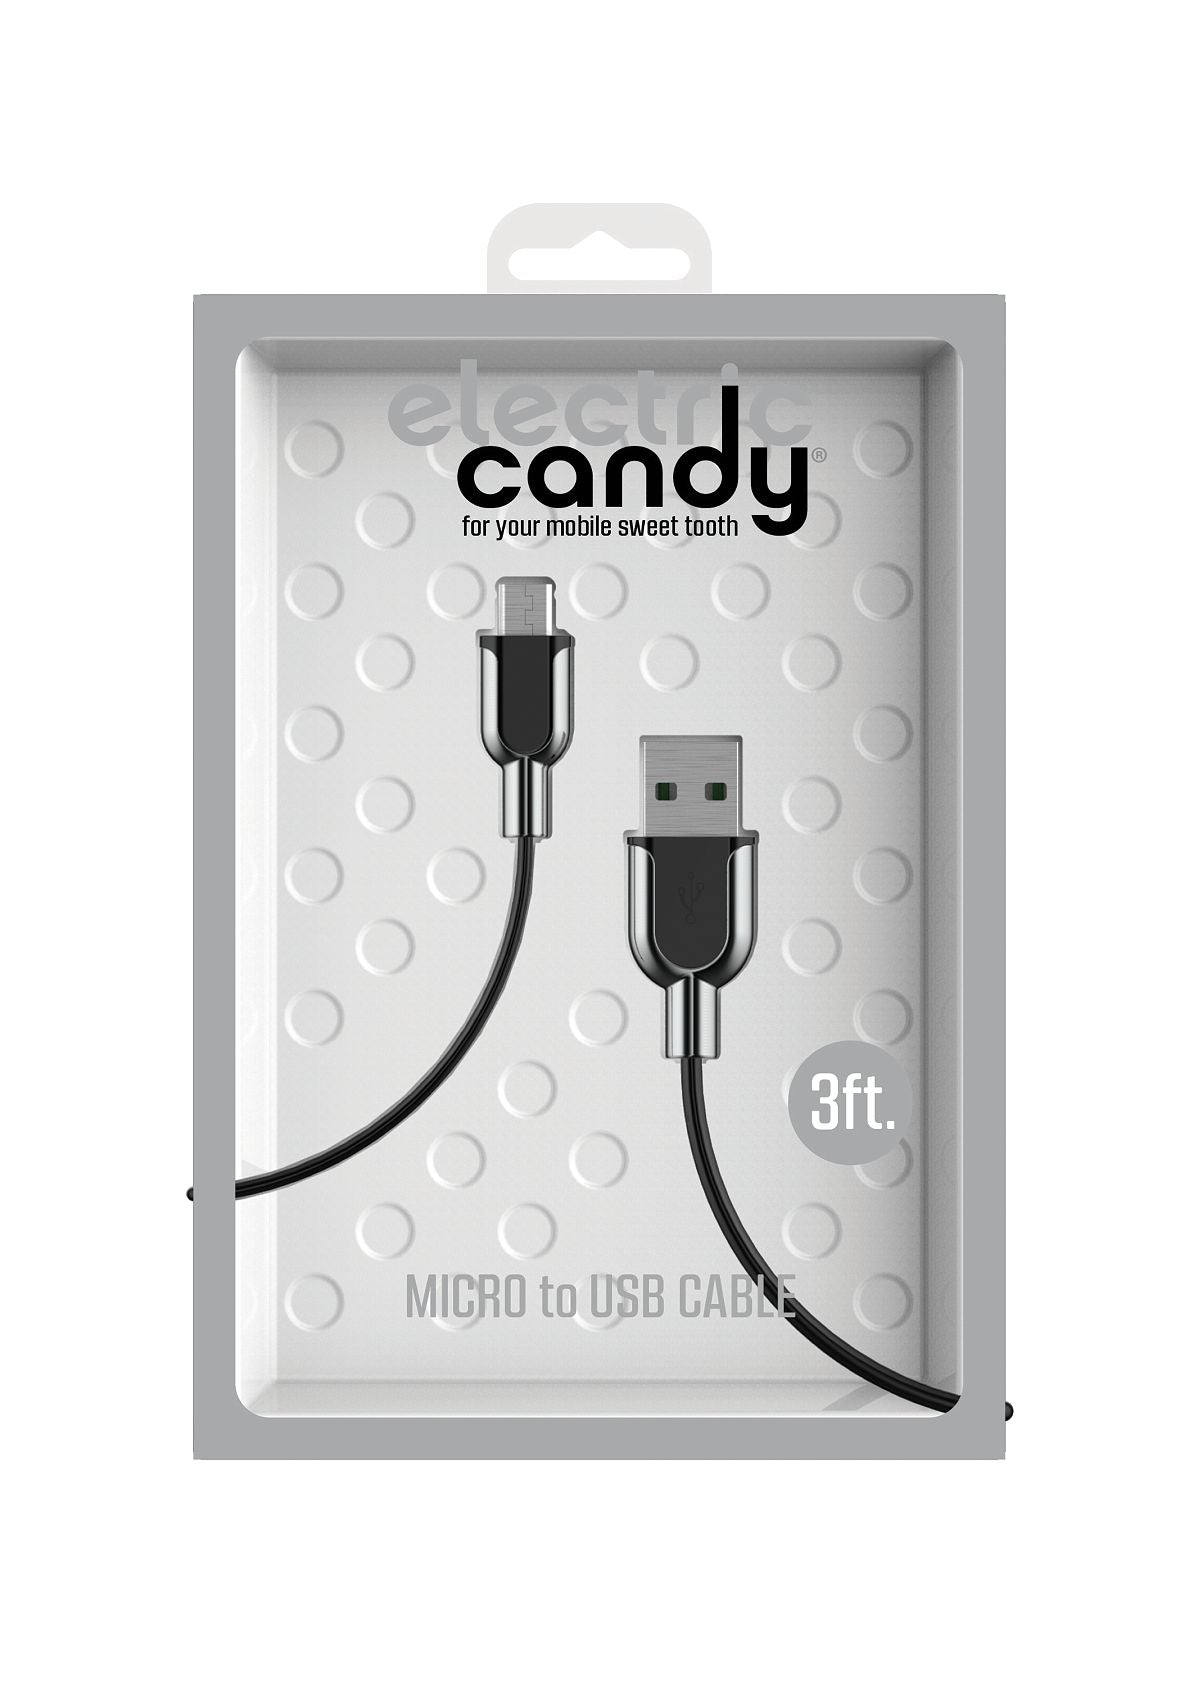 Tzumi Electric Candy Micro-usb Charging Cable Black/Silver